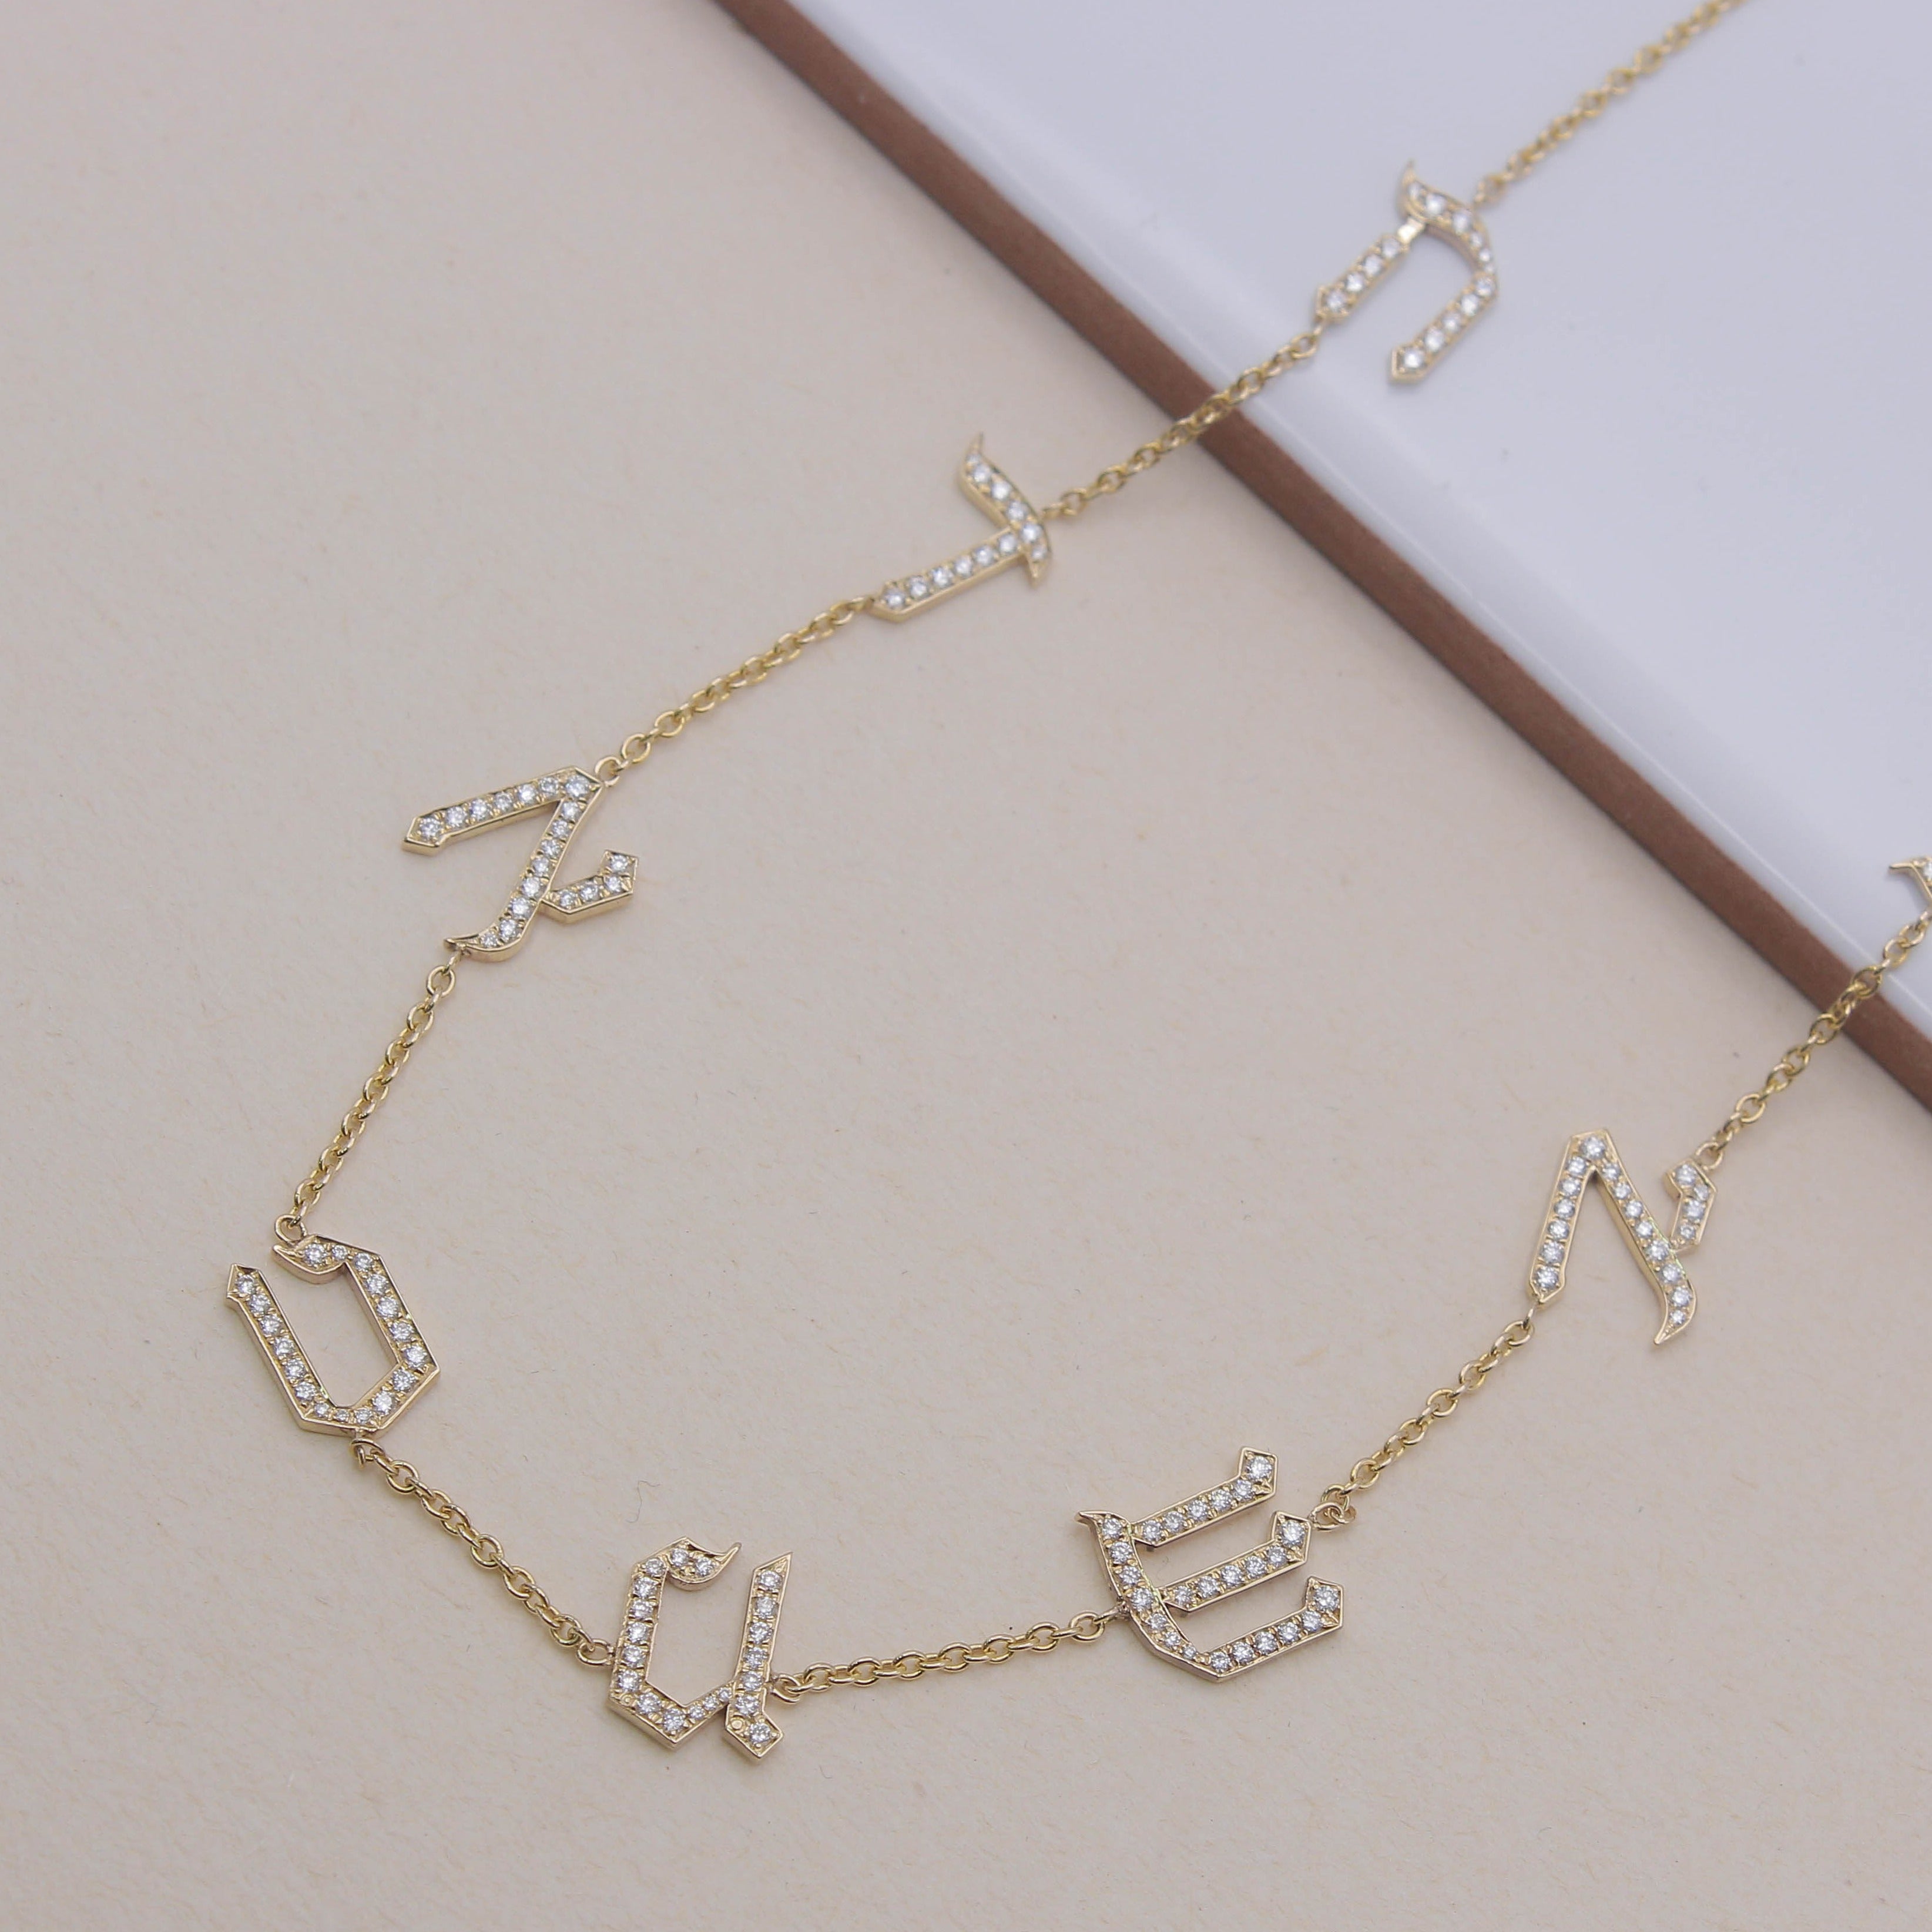 Eight letters necklace set with diamonds